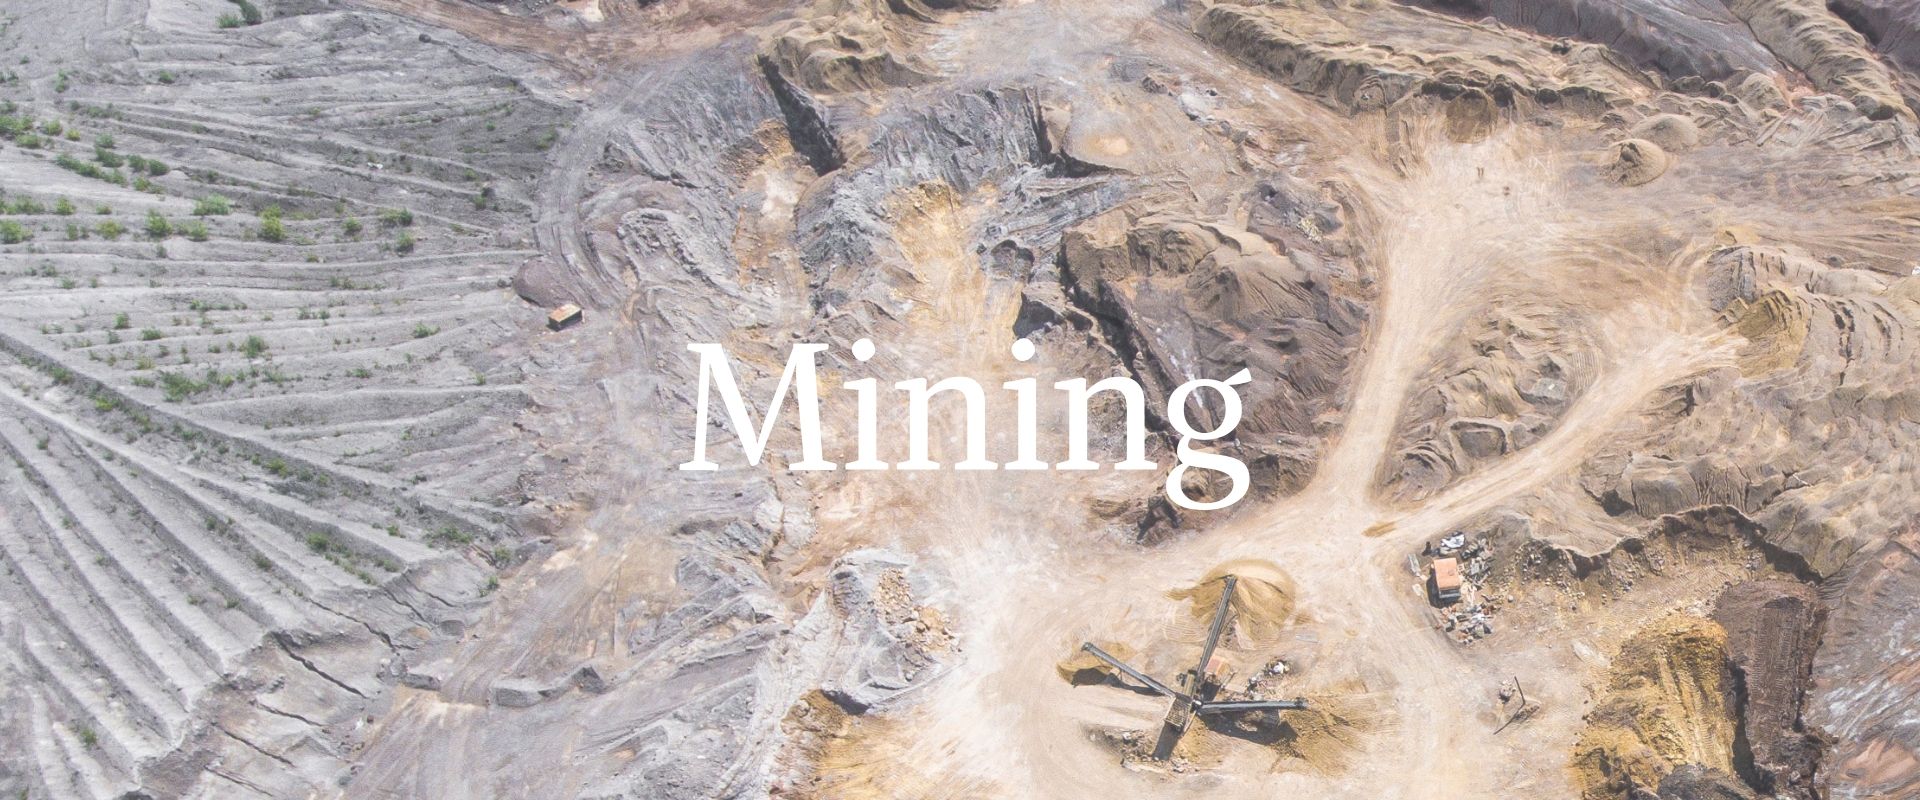 Bilingual solutions in mining